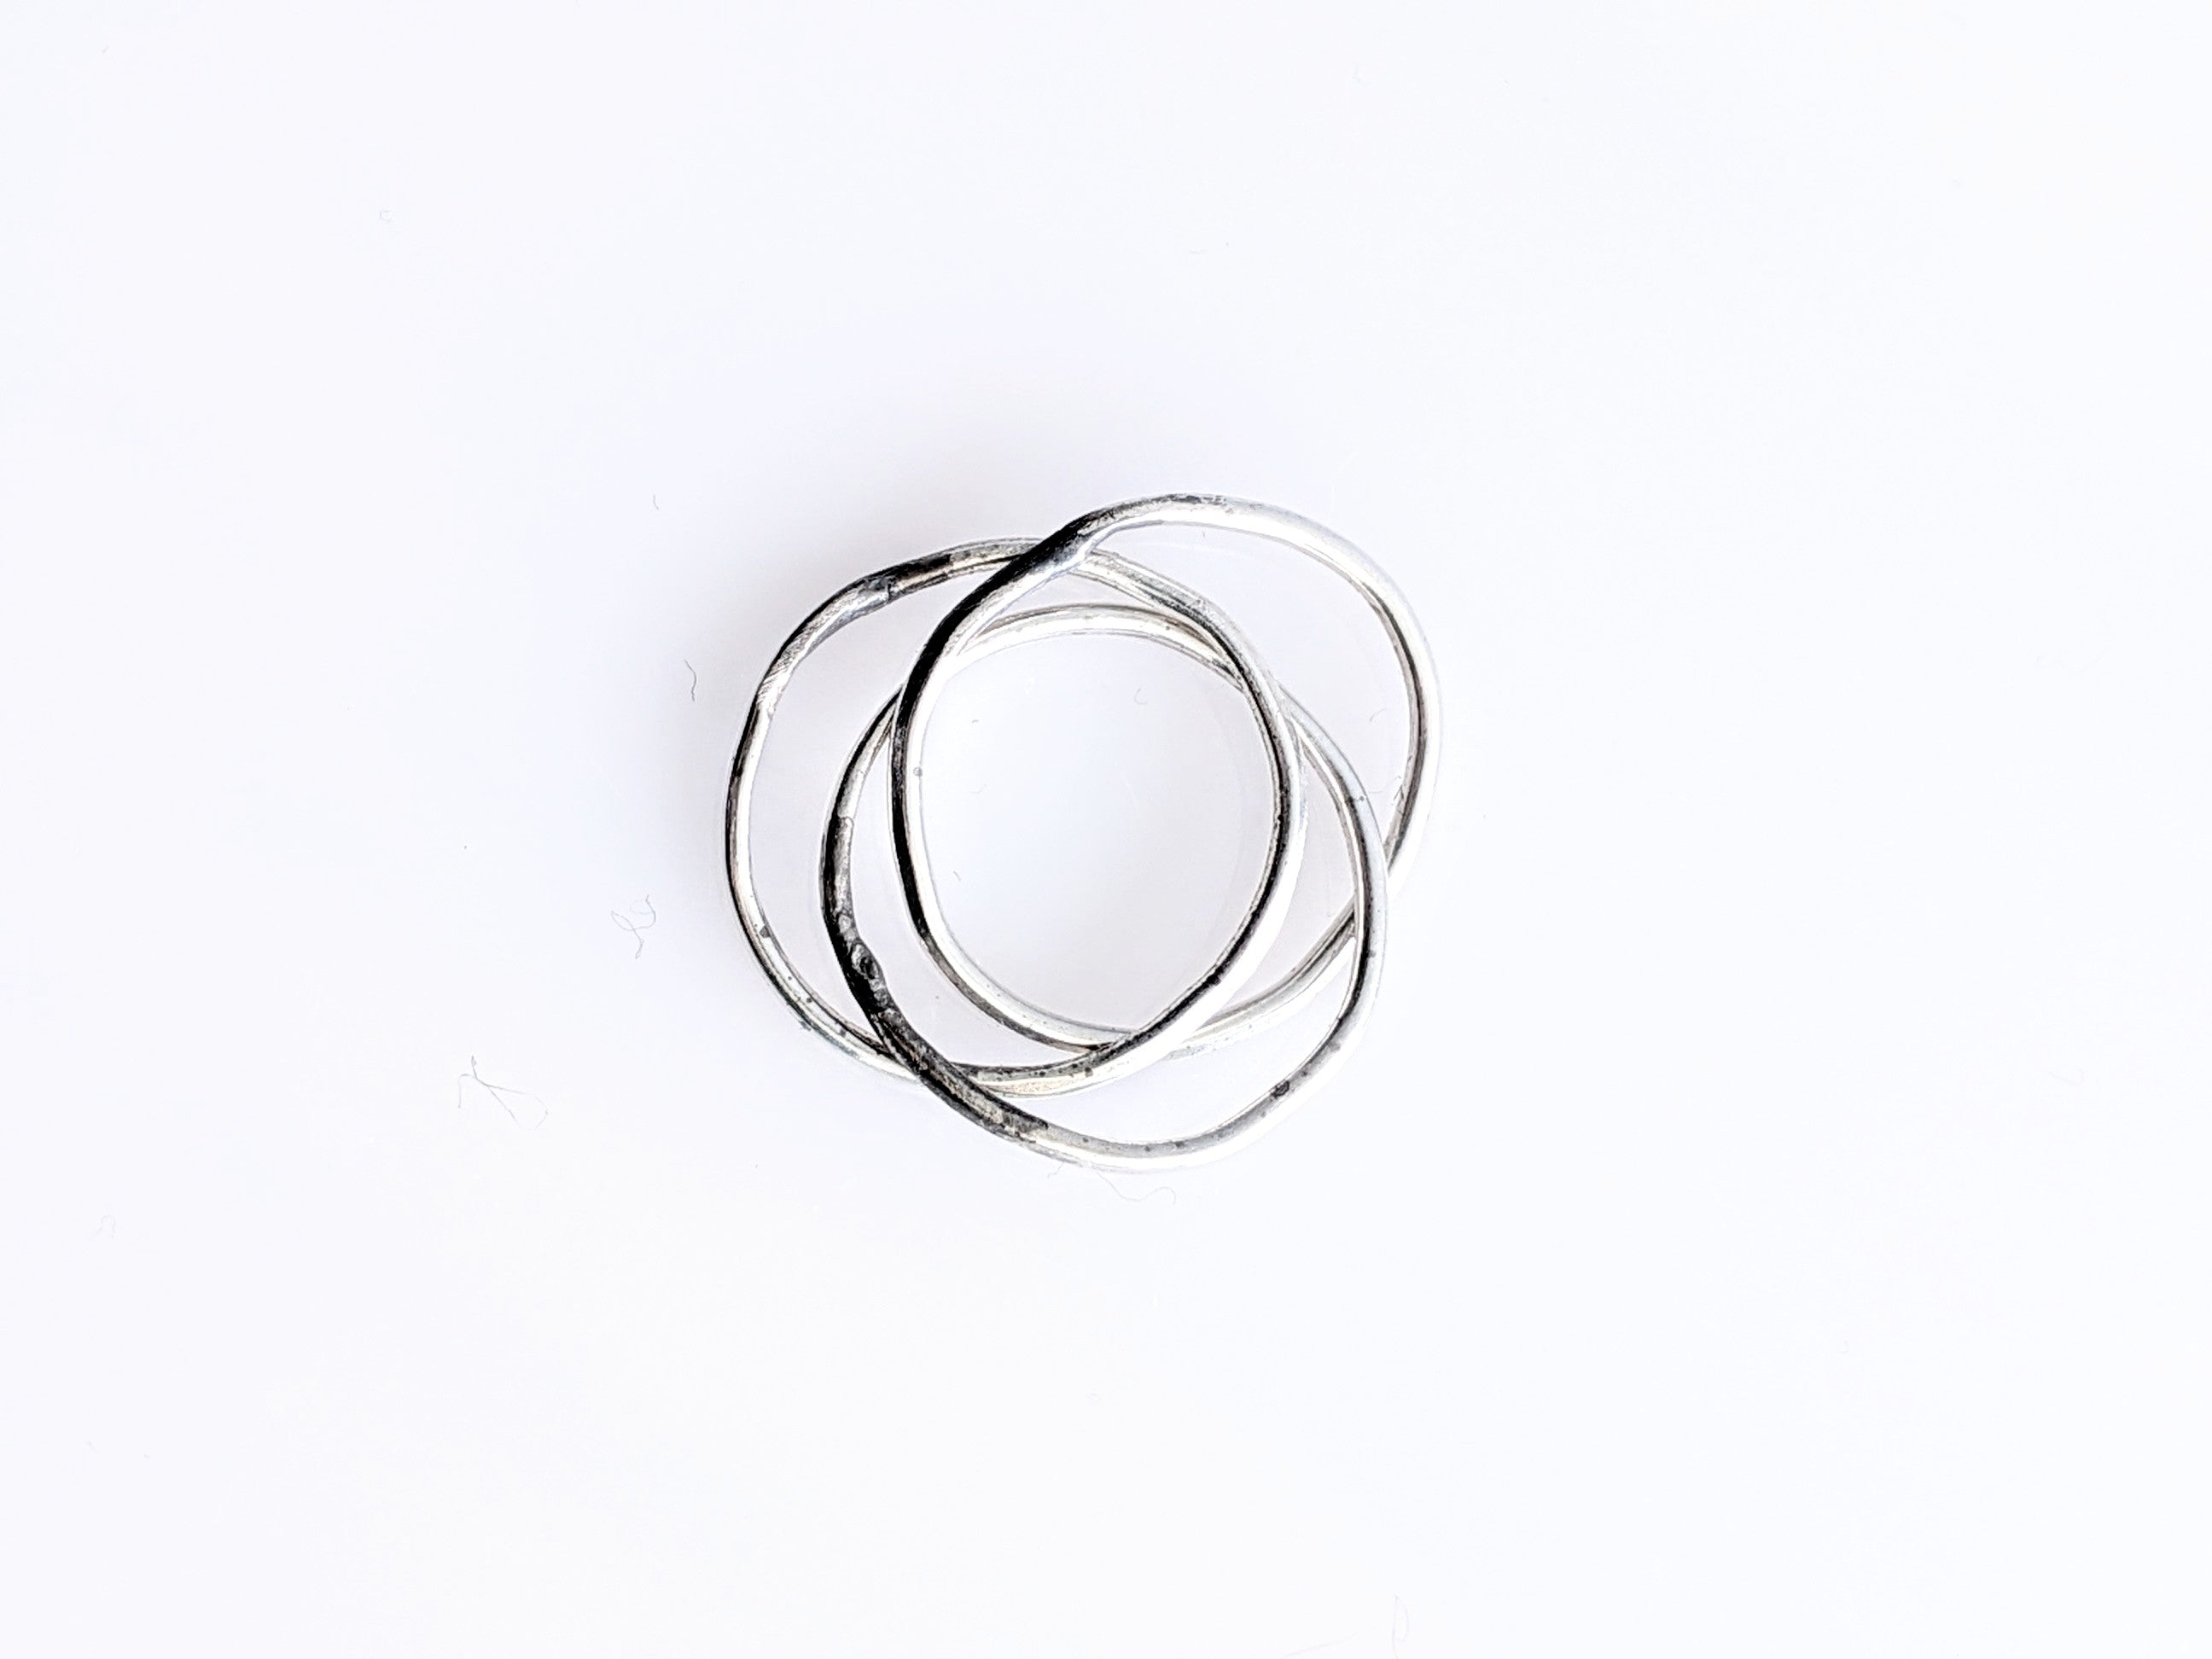 3 Band Intertwined Ring in Sterling Silver